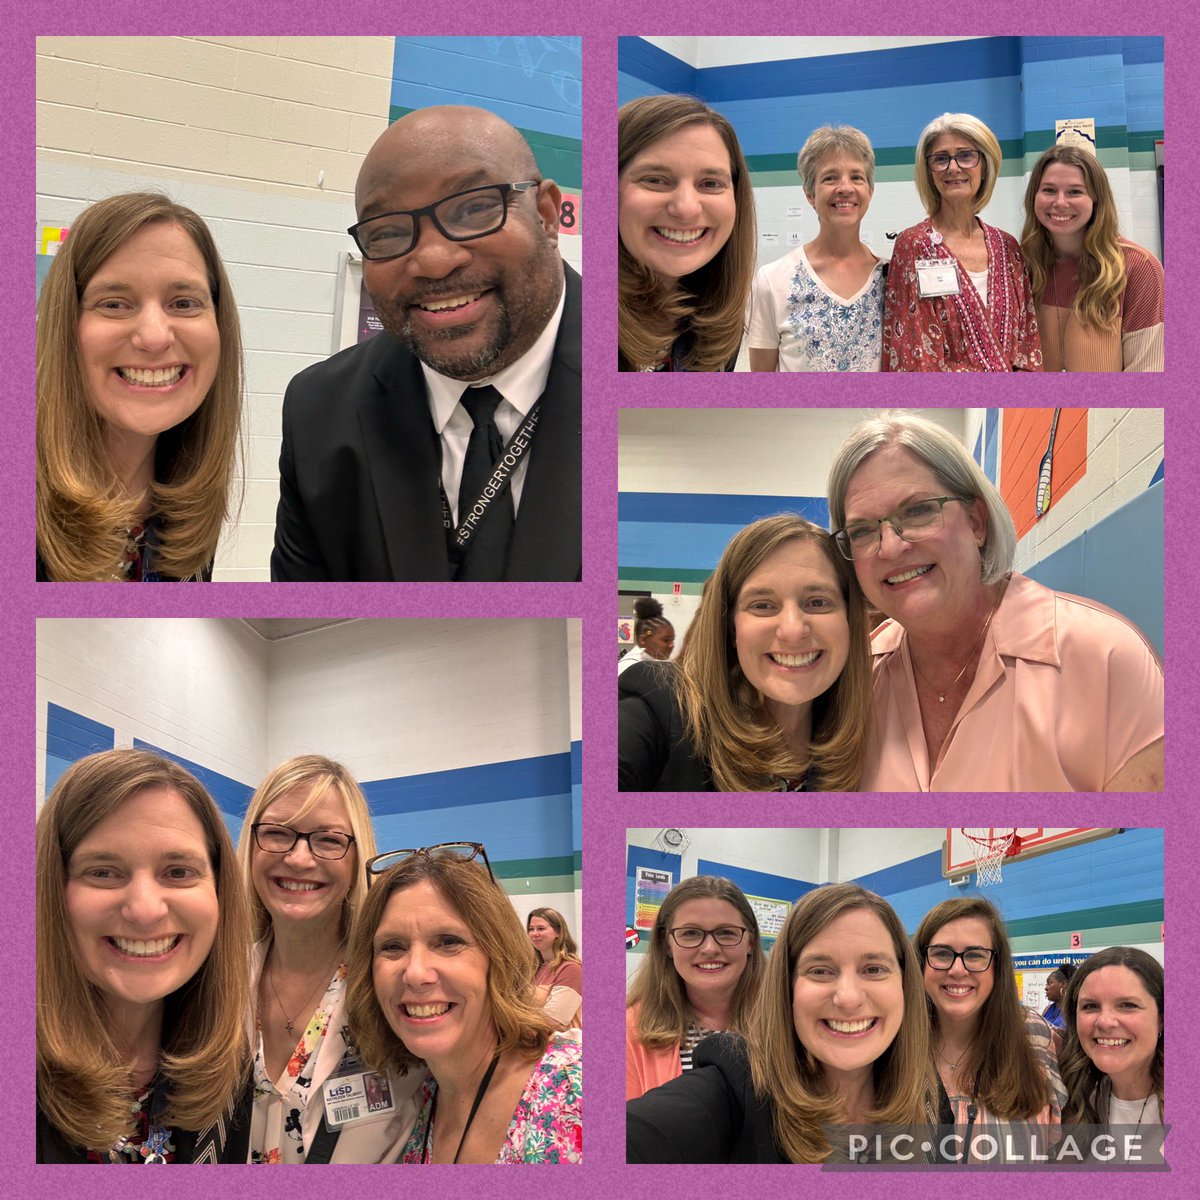 A great job to @RockbrookES for celebrating Life Skills students and Circle of Friends! Recognition of staff, and volunteers- who are #BeingtheOne for kids @LewisvilleISD #OneLISD #RappontheRoad